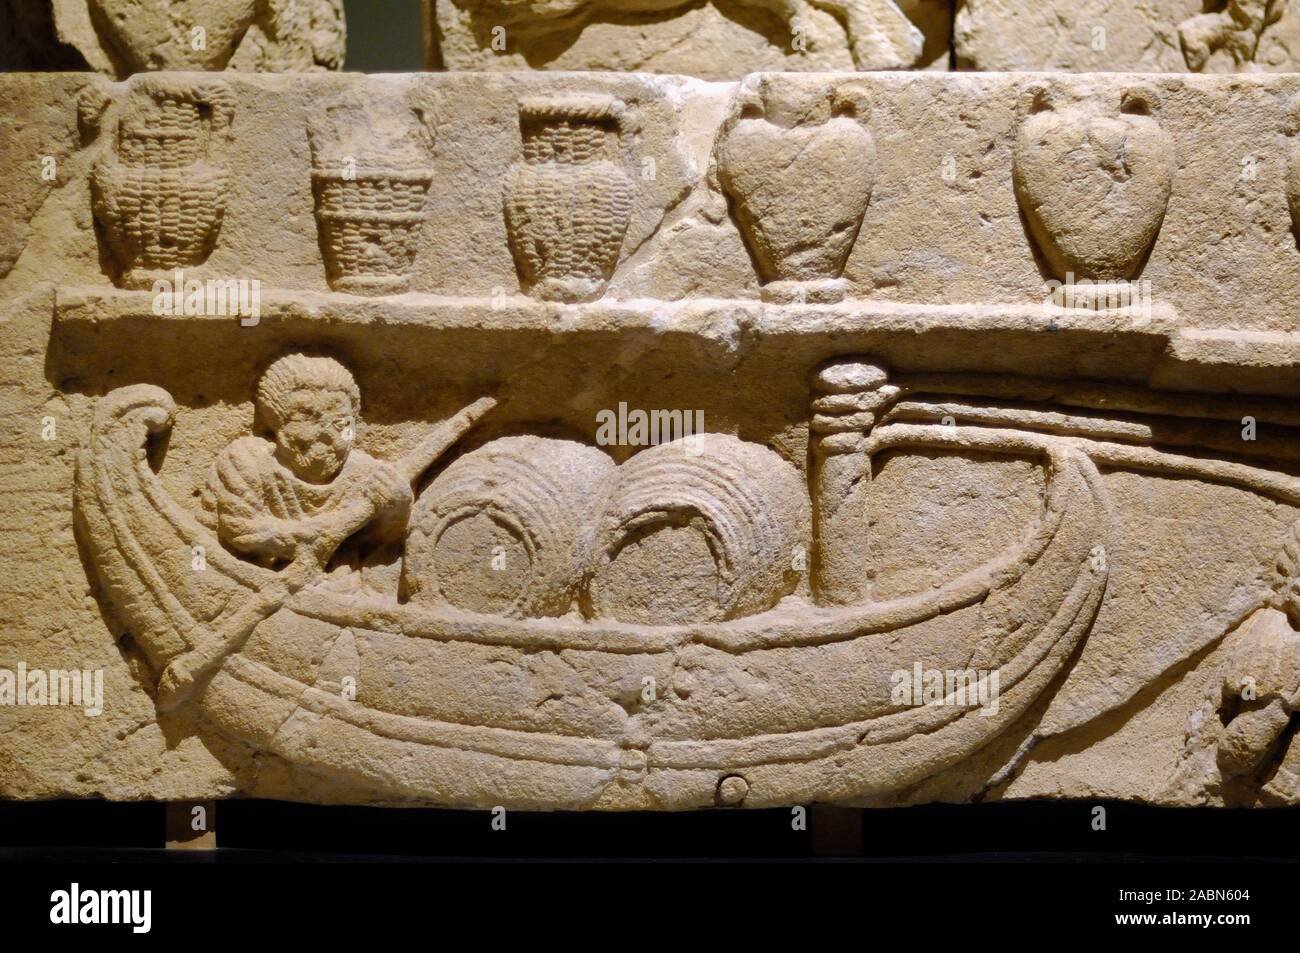 Mausoleum Bas-Relief of Roman Boat or River Barge Loaded with Barrels (c2-3rd) and Amphorae for Wine or Other Goods, from Vaucluse, France Stock Photo